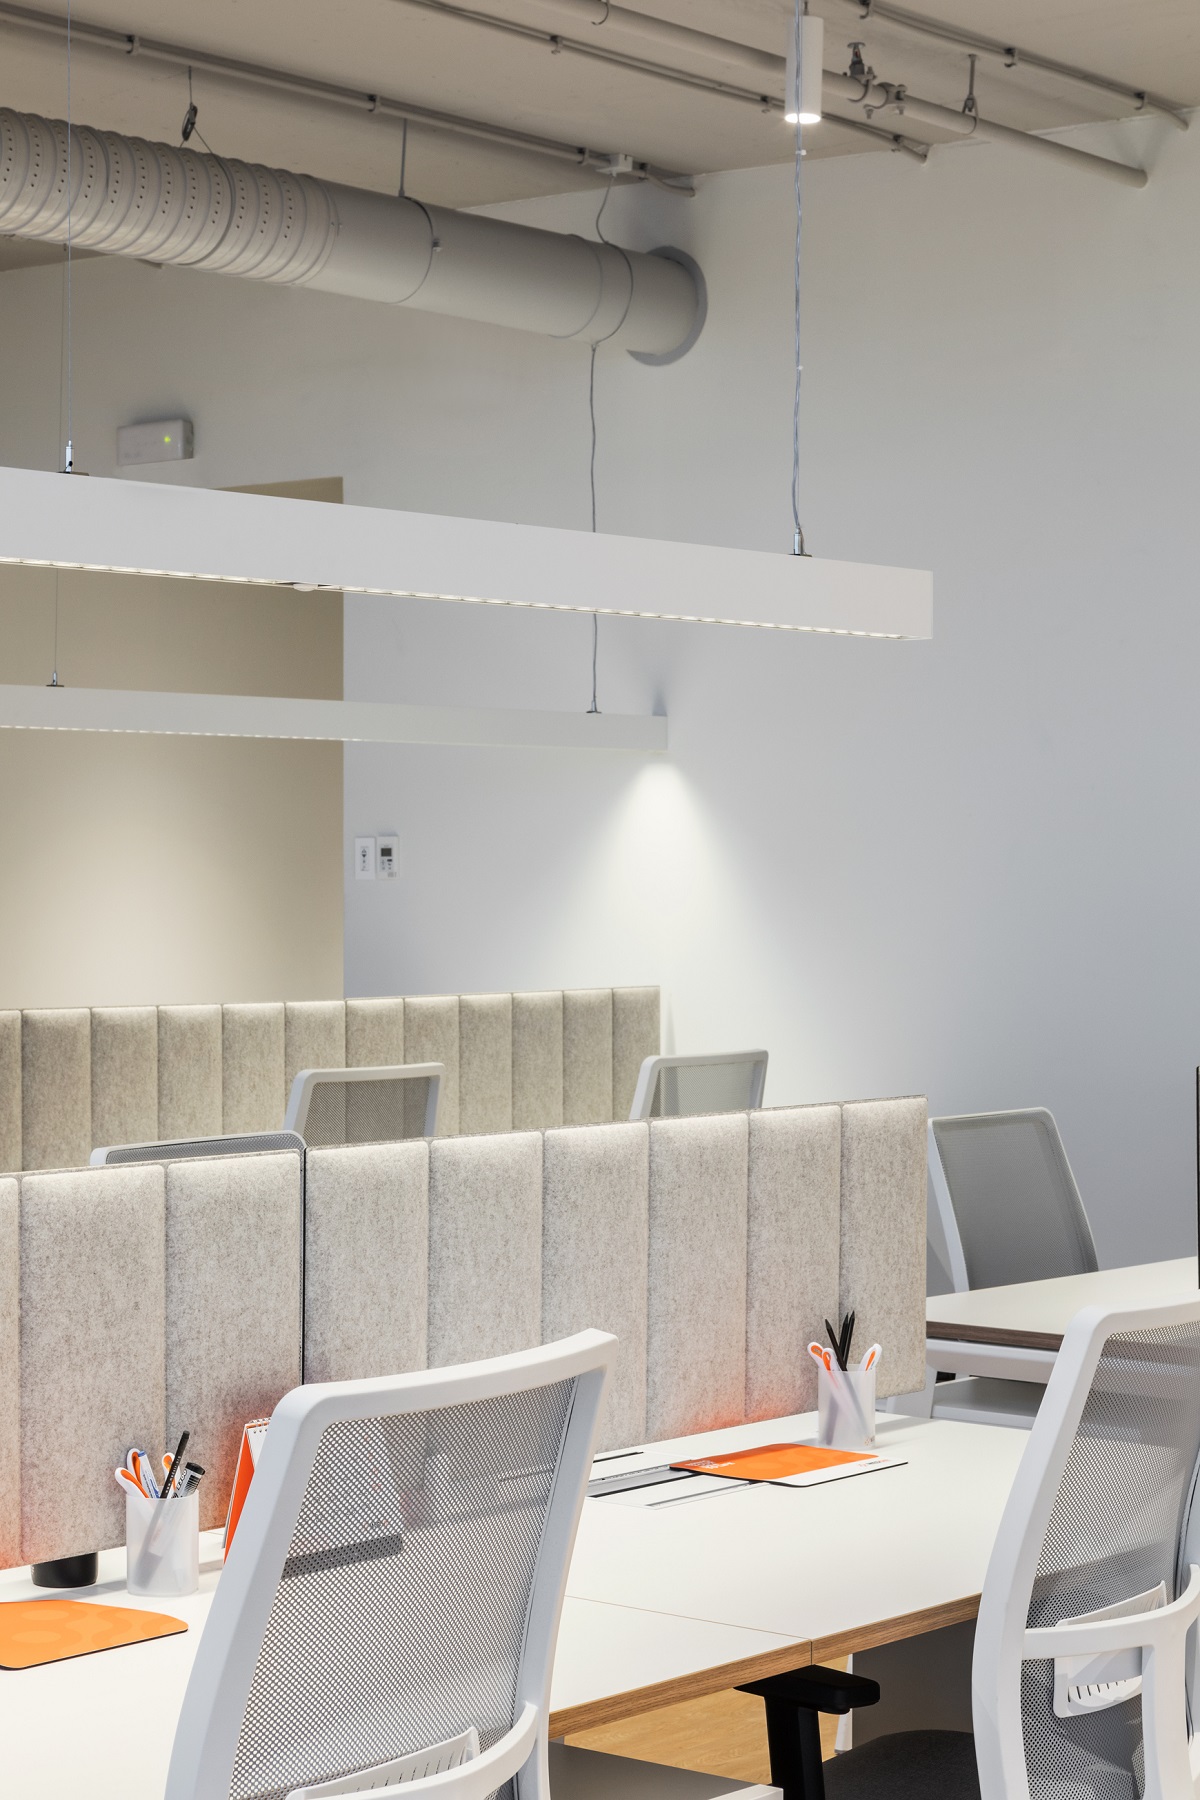 shared and flexible work stations with focussed lighting